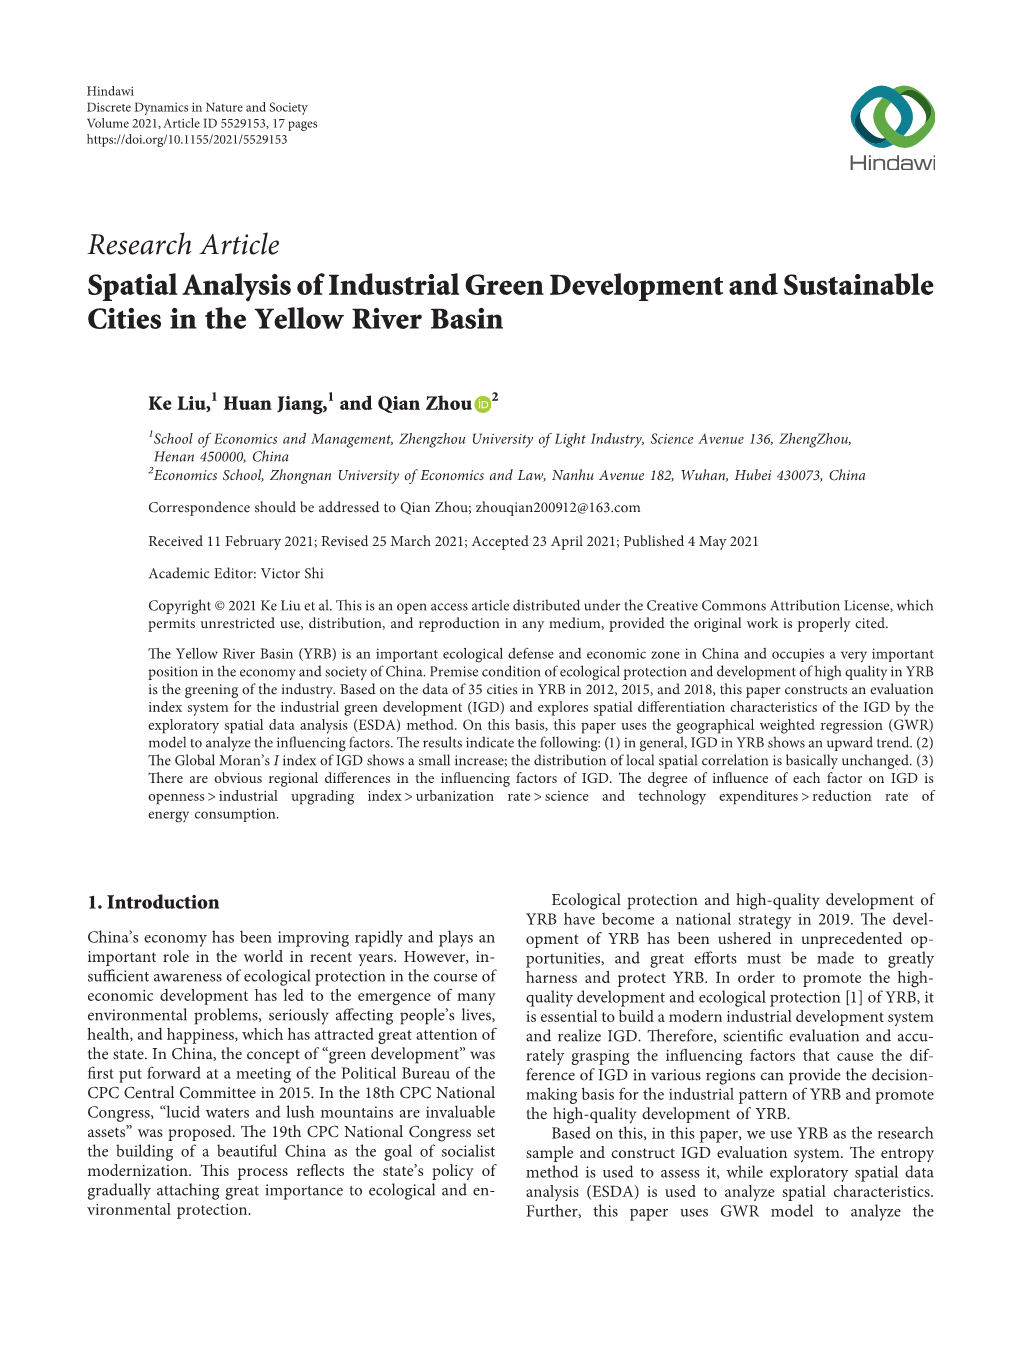 Spatial Analysis of Industrial Green Development and Sustainable Cities in the Yellow River Basin